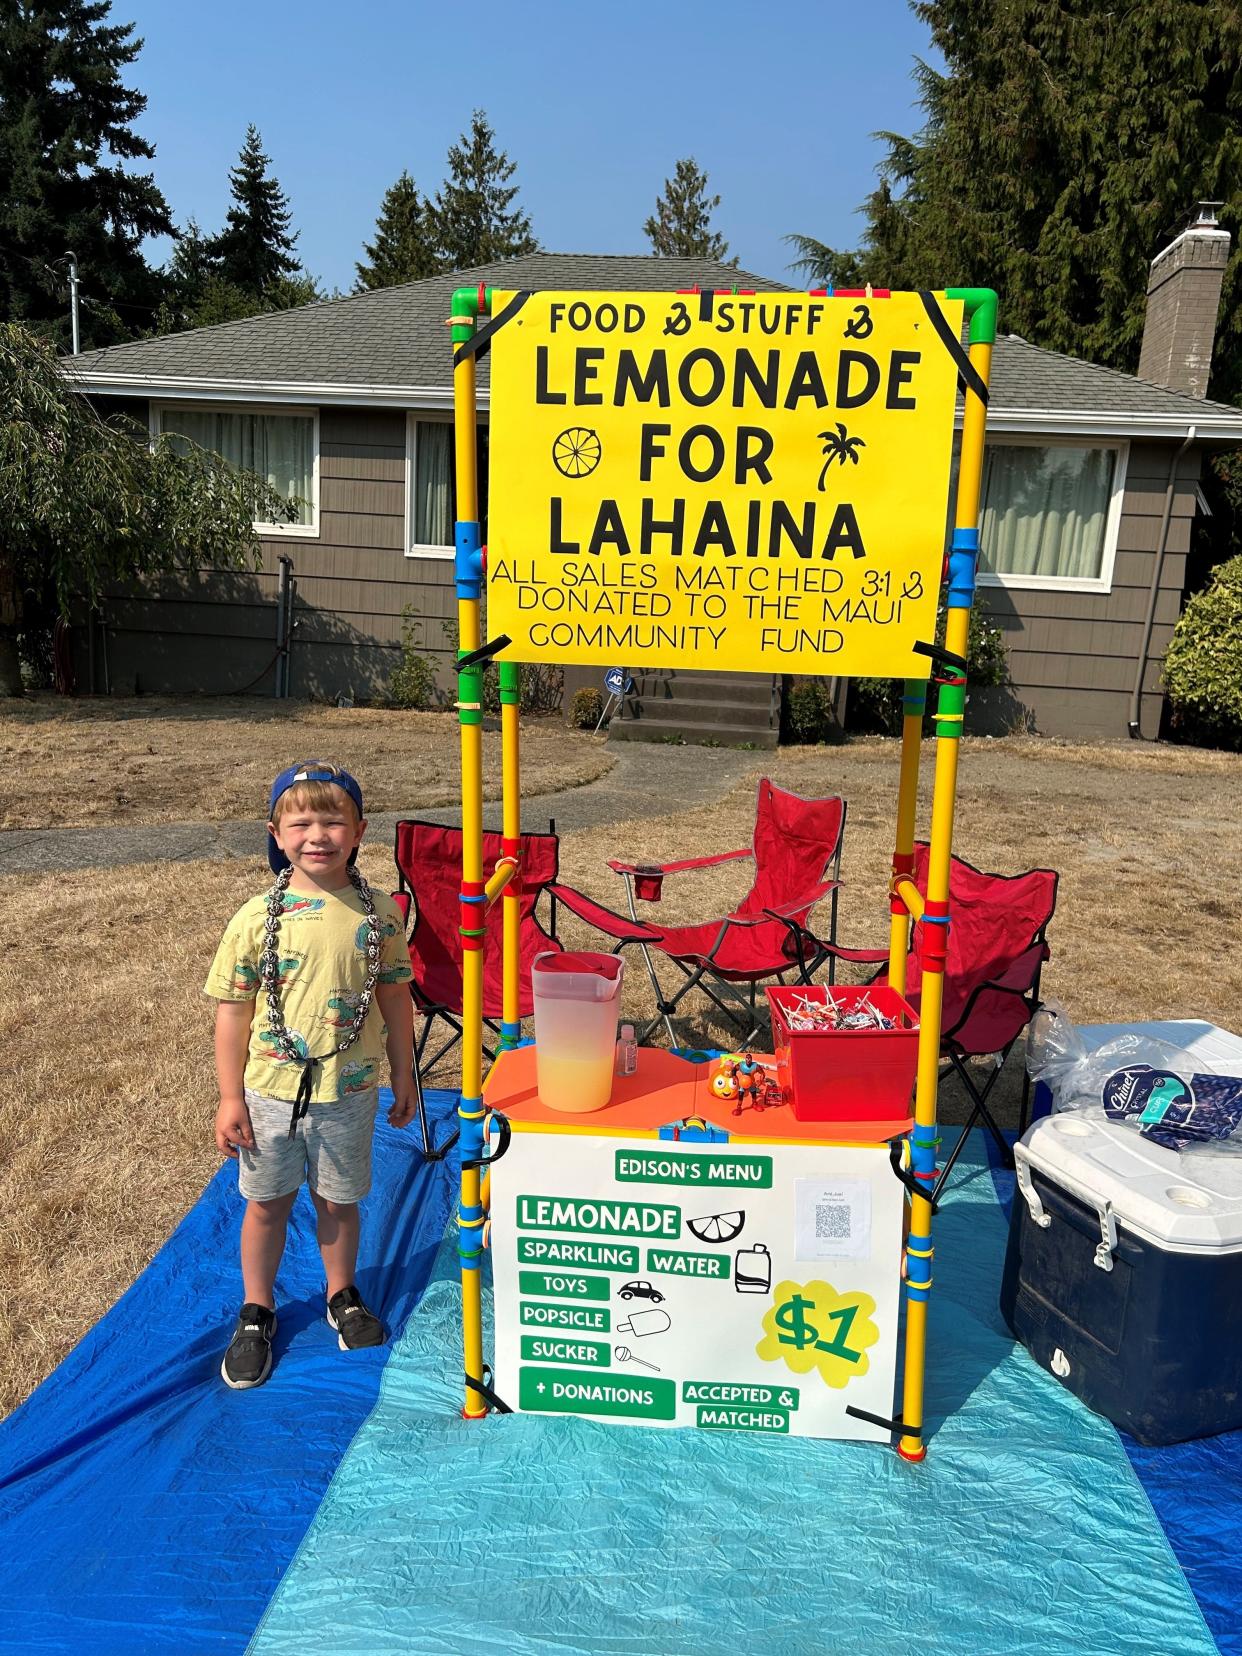 Edison Juel's lemonade stand in Seattle helped raise over $16,000 for victims from the Maui wildfires.